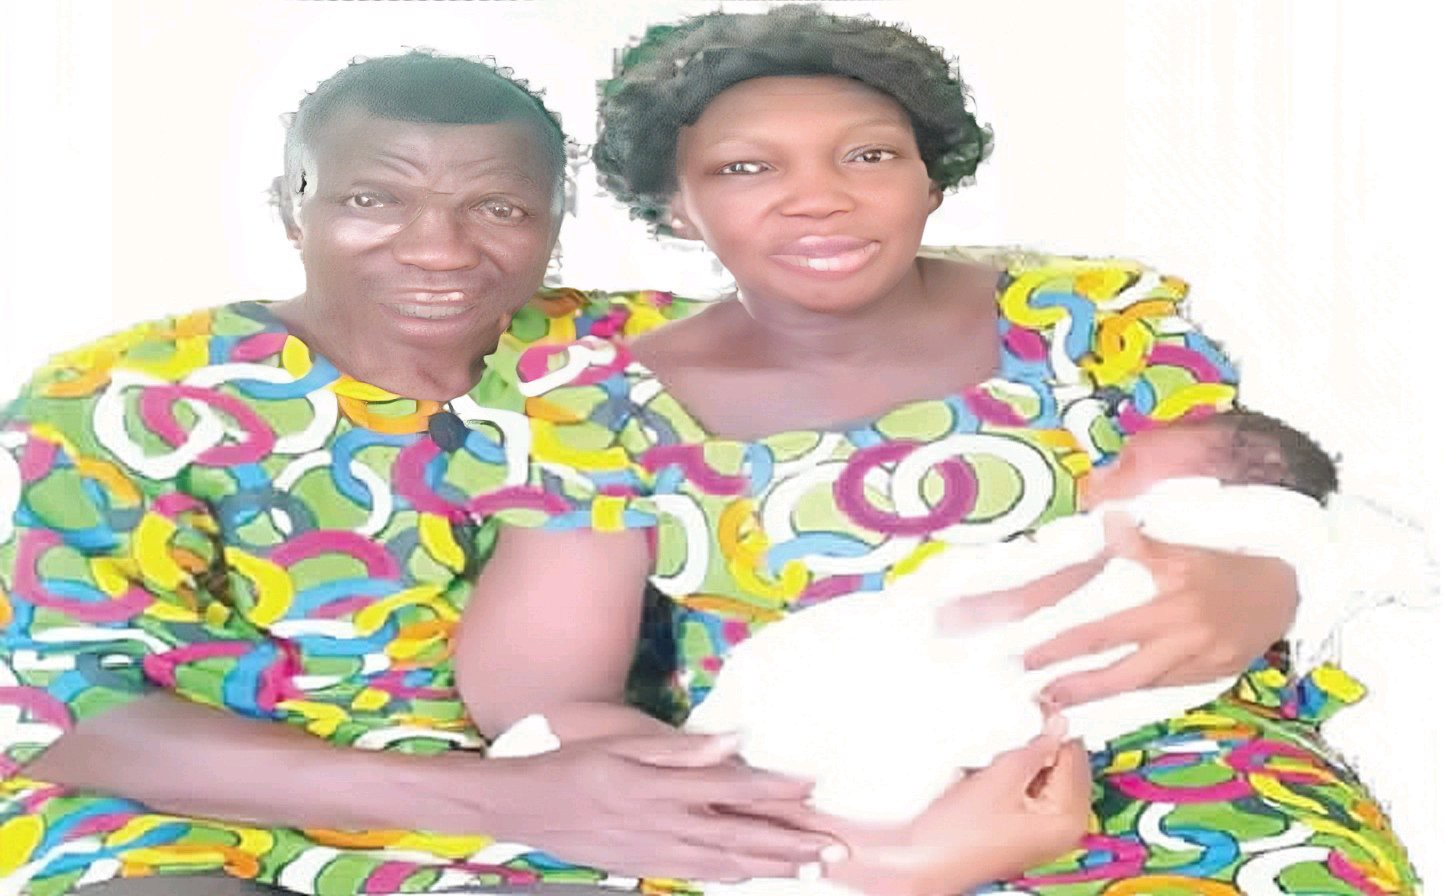 None Of My Husband’s Family Saw Me While I Was Pregnant, Even When They Had Functions -Woman Said